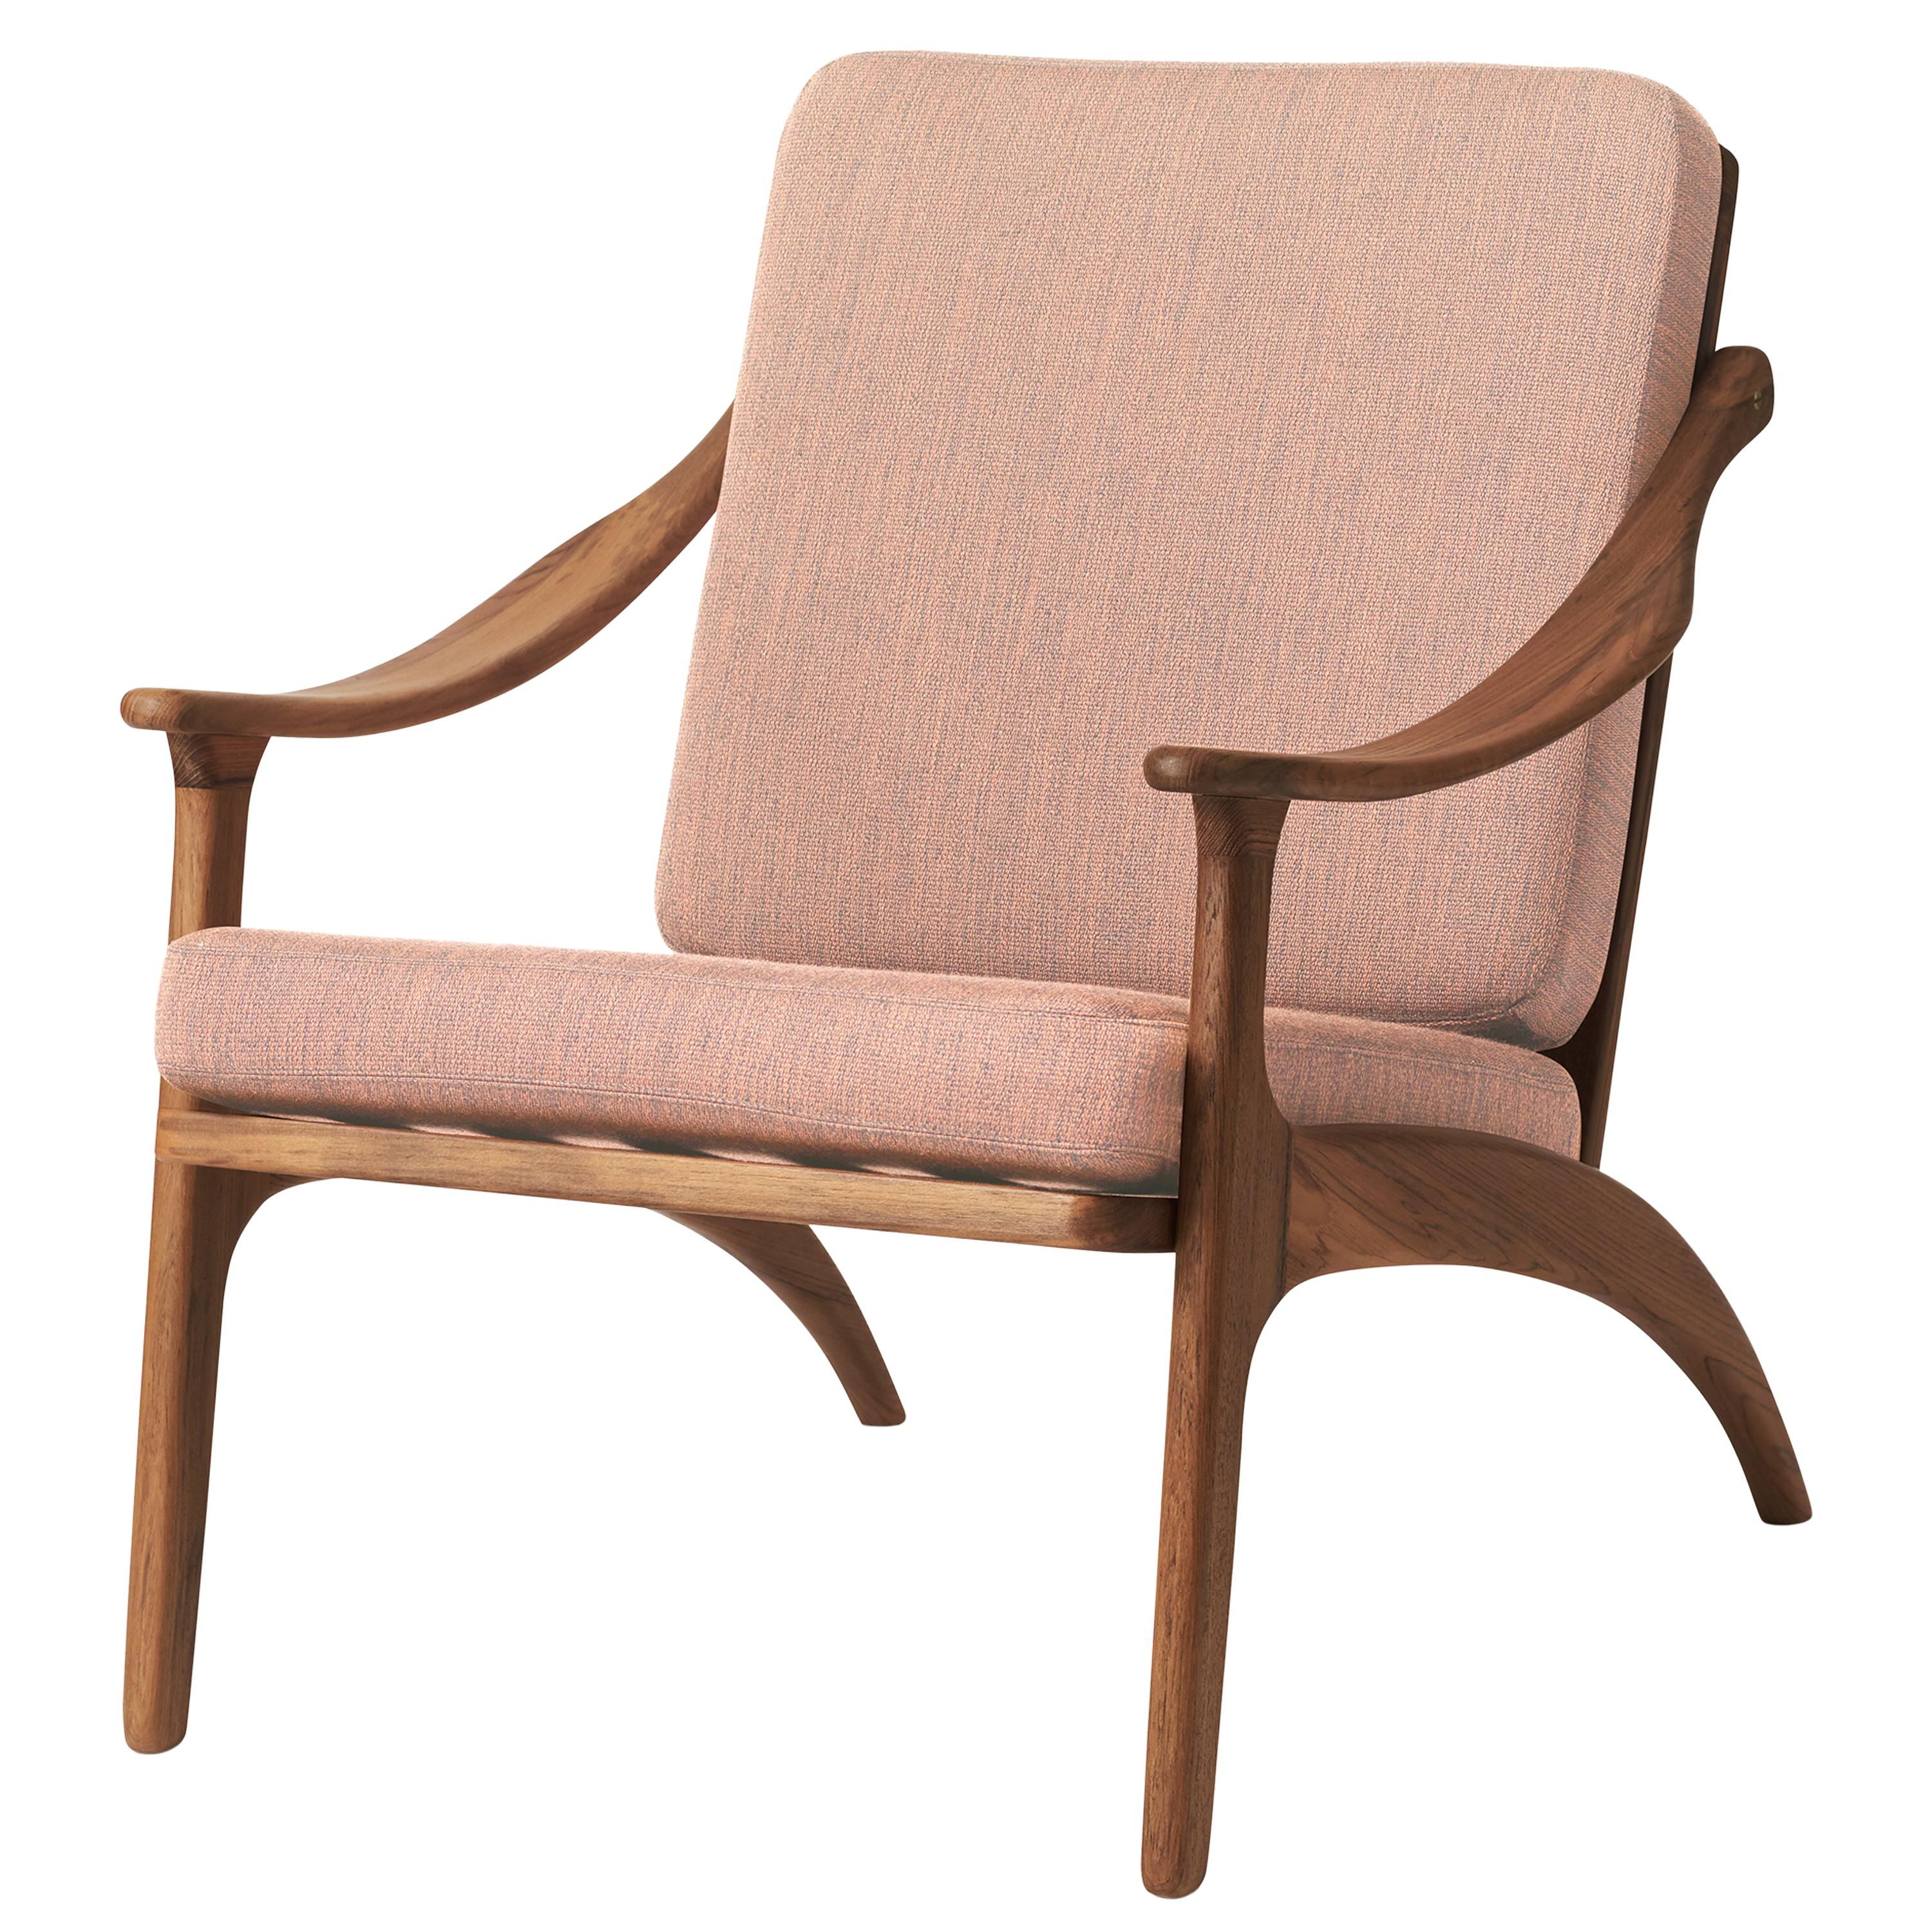 For Sale: Pink (Canvas 614) Lean Back Monochrome Lounge Chair in Teak, by Arne Hovmand-Olsen from Warm